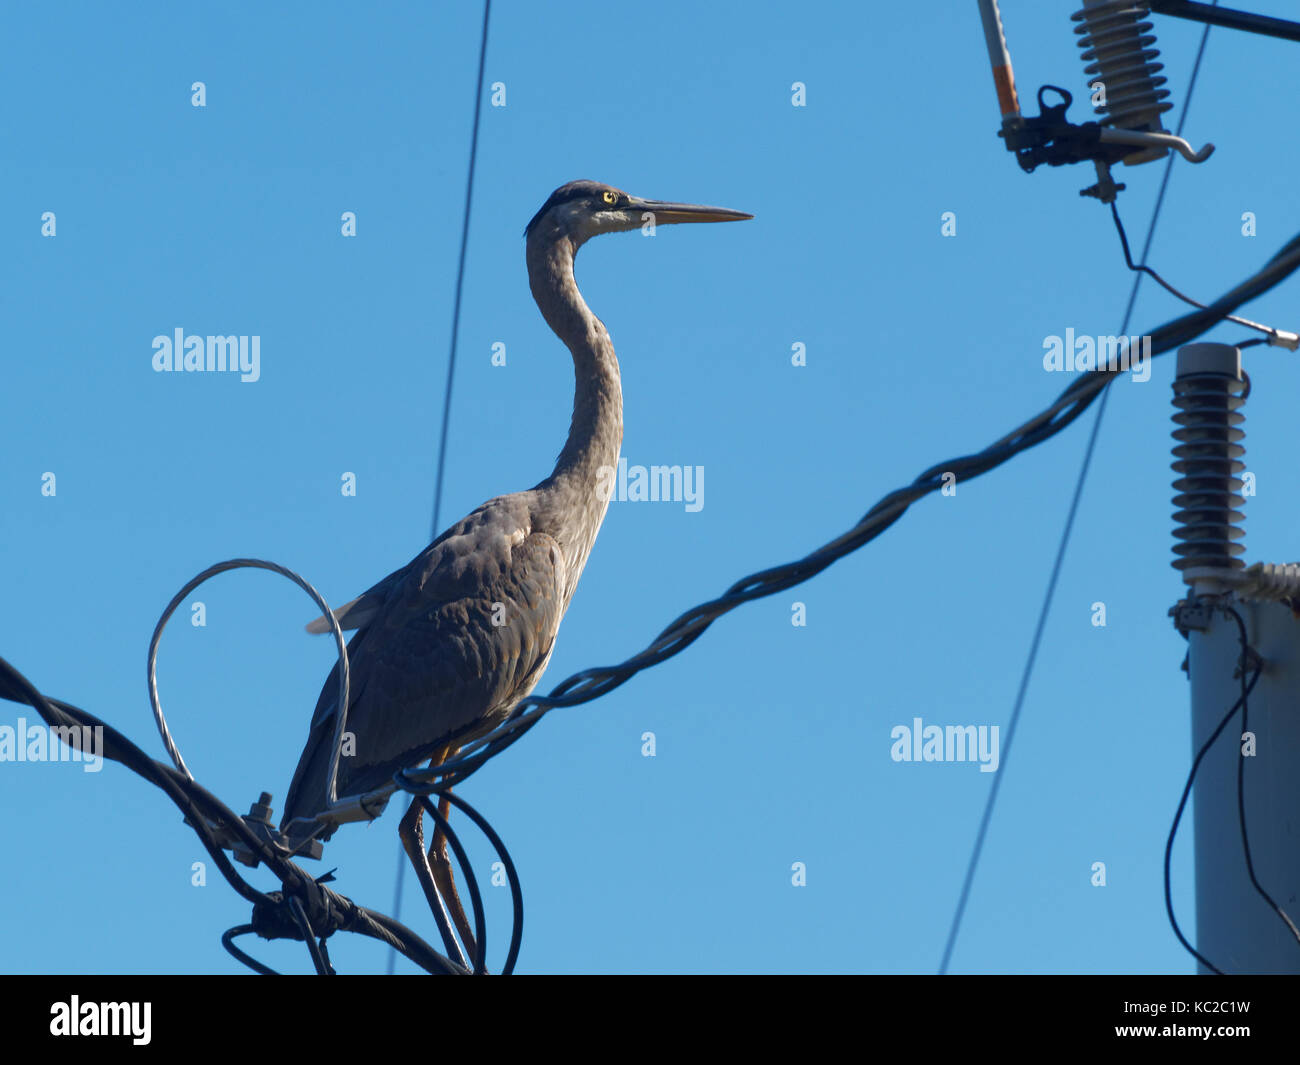 Quebec,Canada. A Grey Heron sitting on electric wires Stock Photo